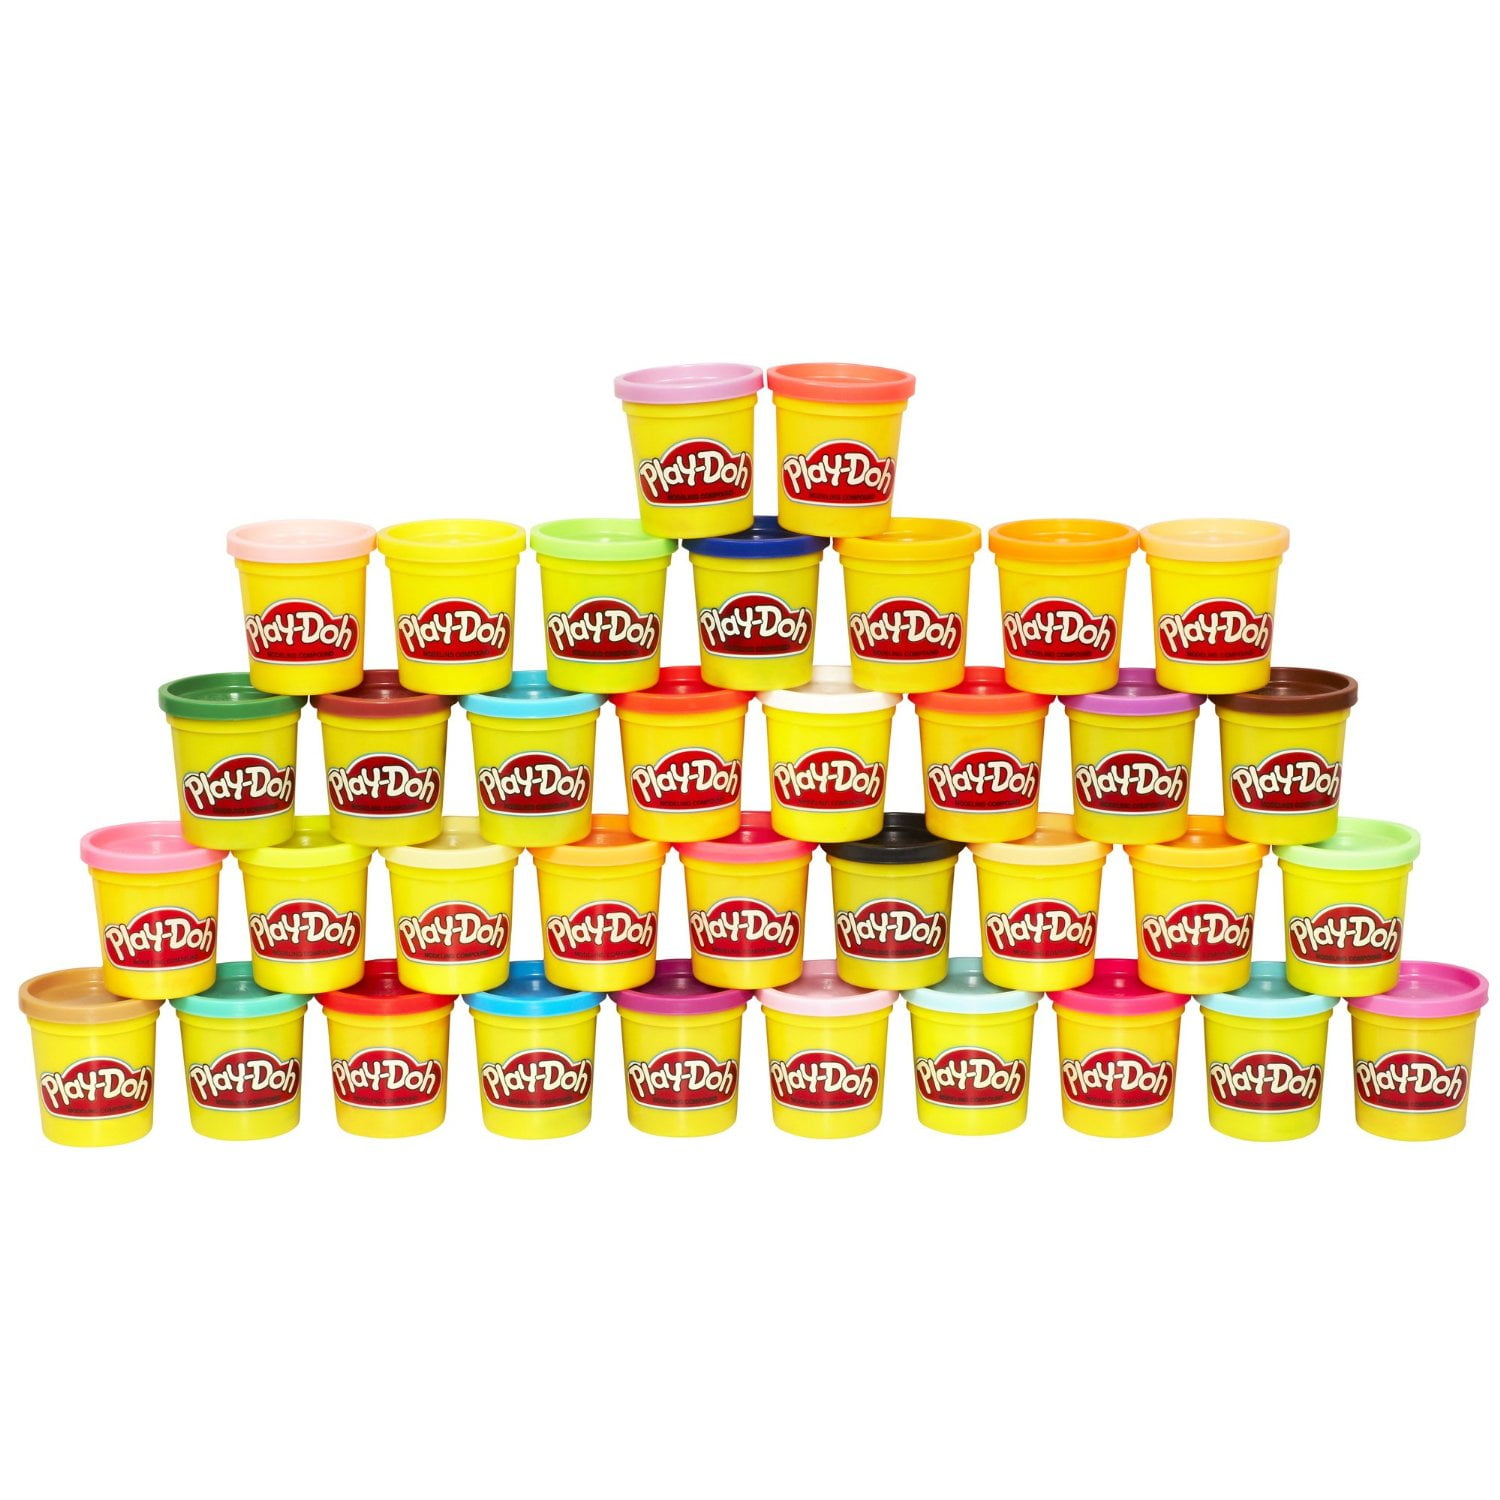 Play-Doh Modeling Compound 36 Pack Case of Colors, Party Favors, Non-Toxic,  Assorted Colors, 3 Oz Cans, Kids Easter Basket Stuffers ( Exclusive)